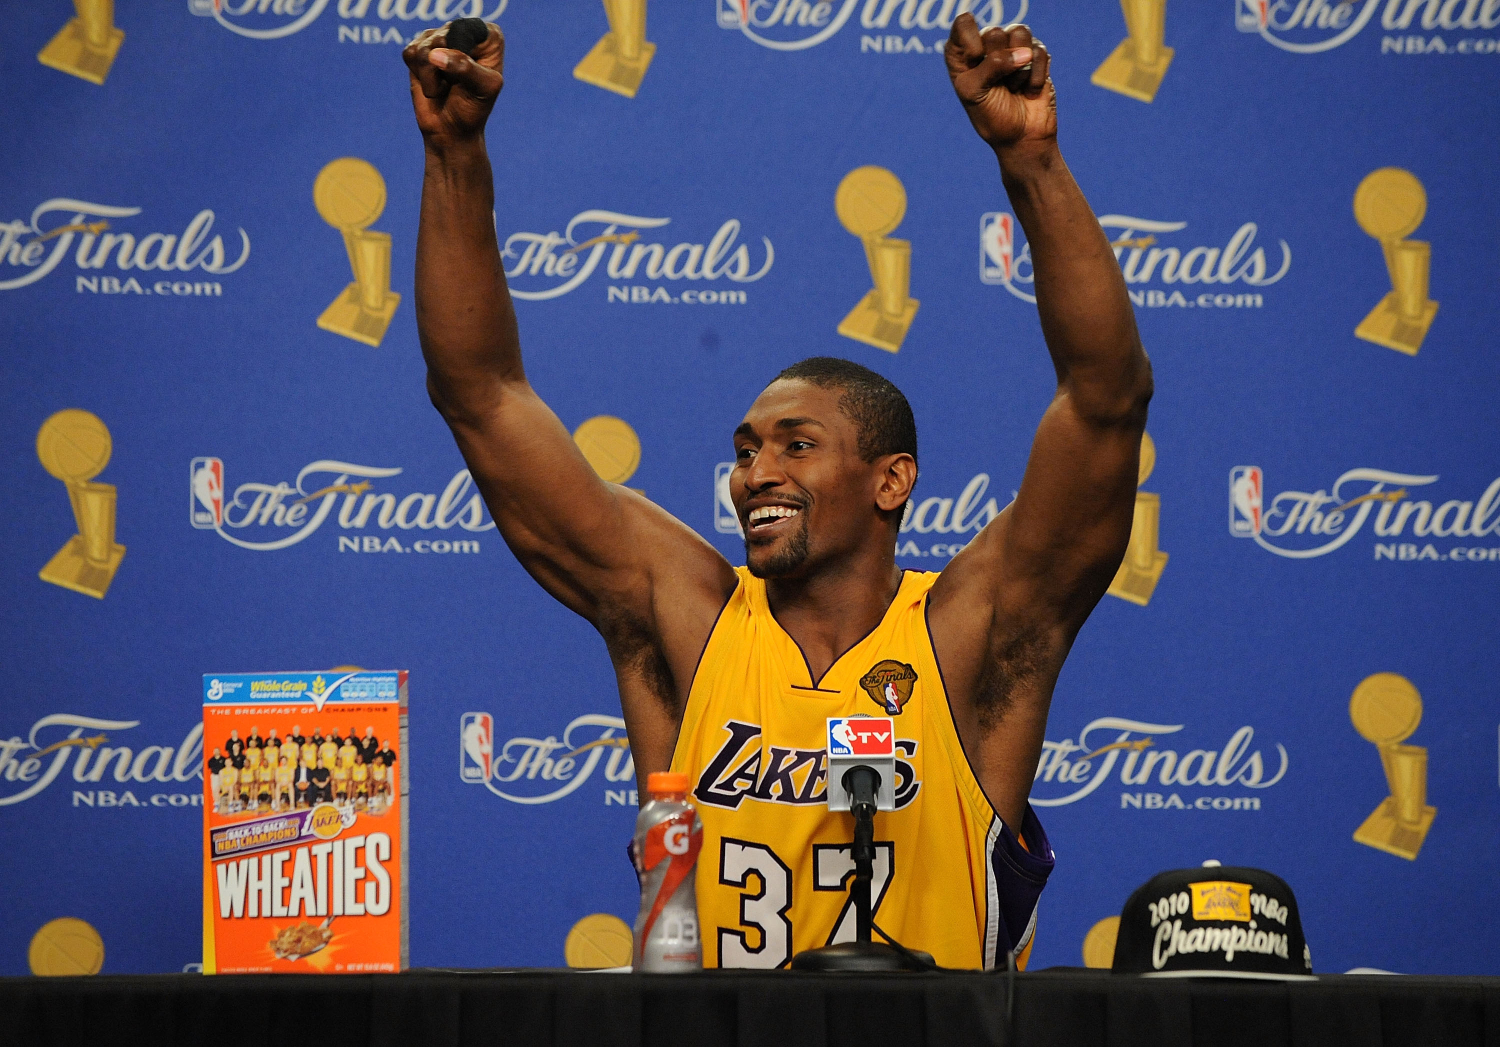 Many people have been celebrating the Los Angeles Lakers' recent NBA championship. This includes former Lakers star Metta World Peace.